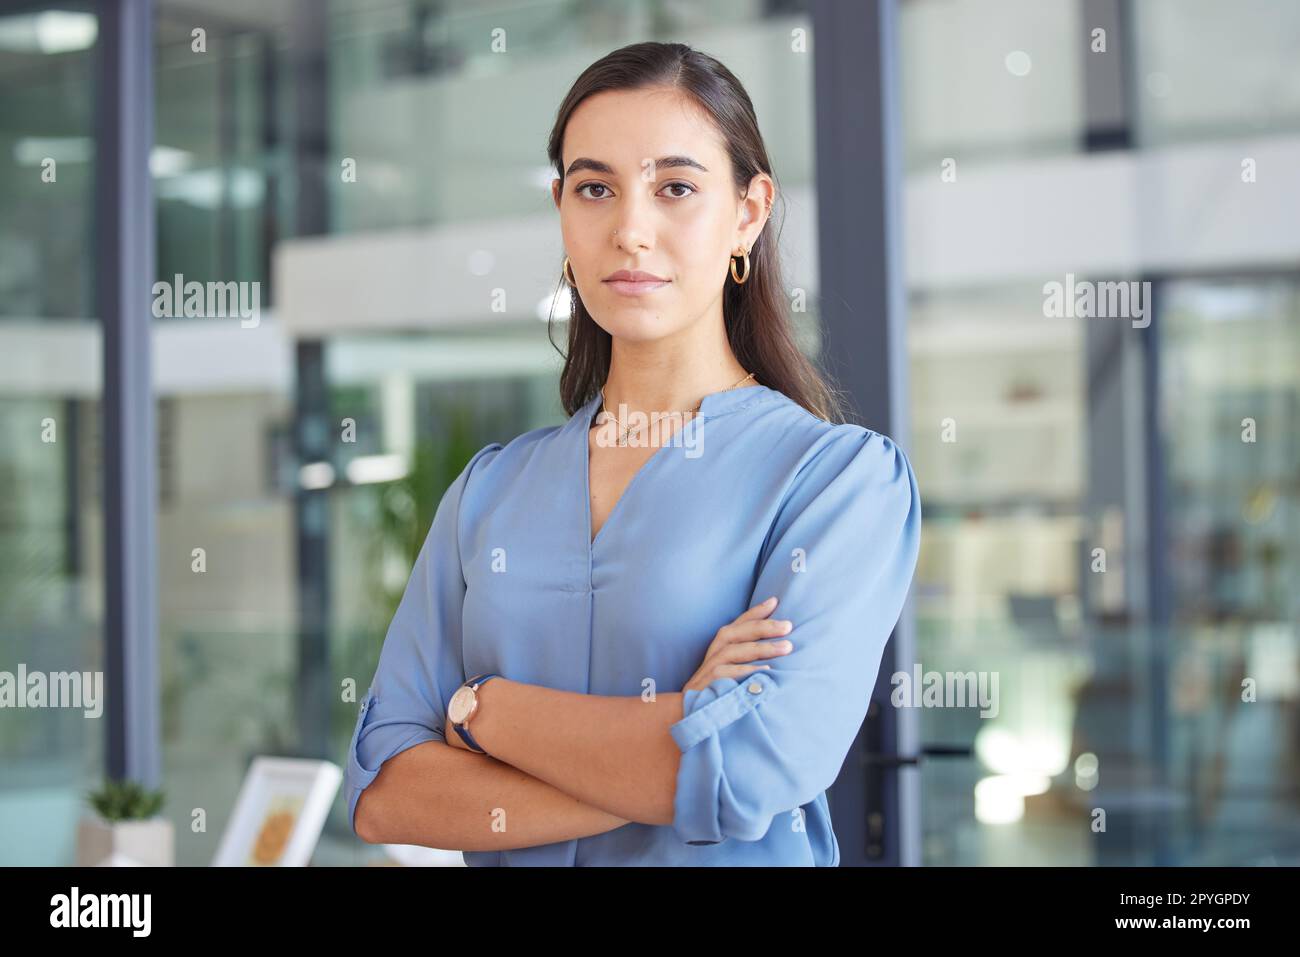 Face, leadership and business woman with arms crossed in office ready for targets or goals. Ceo, boss and portrait of proud female entrepreneur from Canada with vision, mission and success mindset Stock Photo